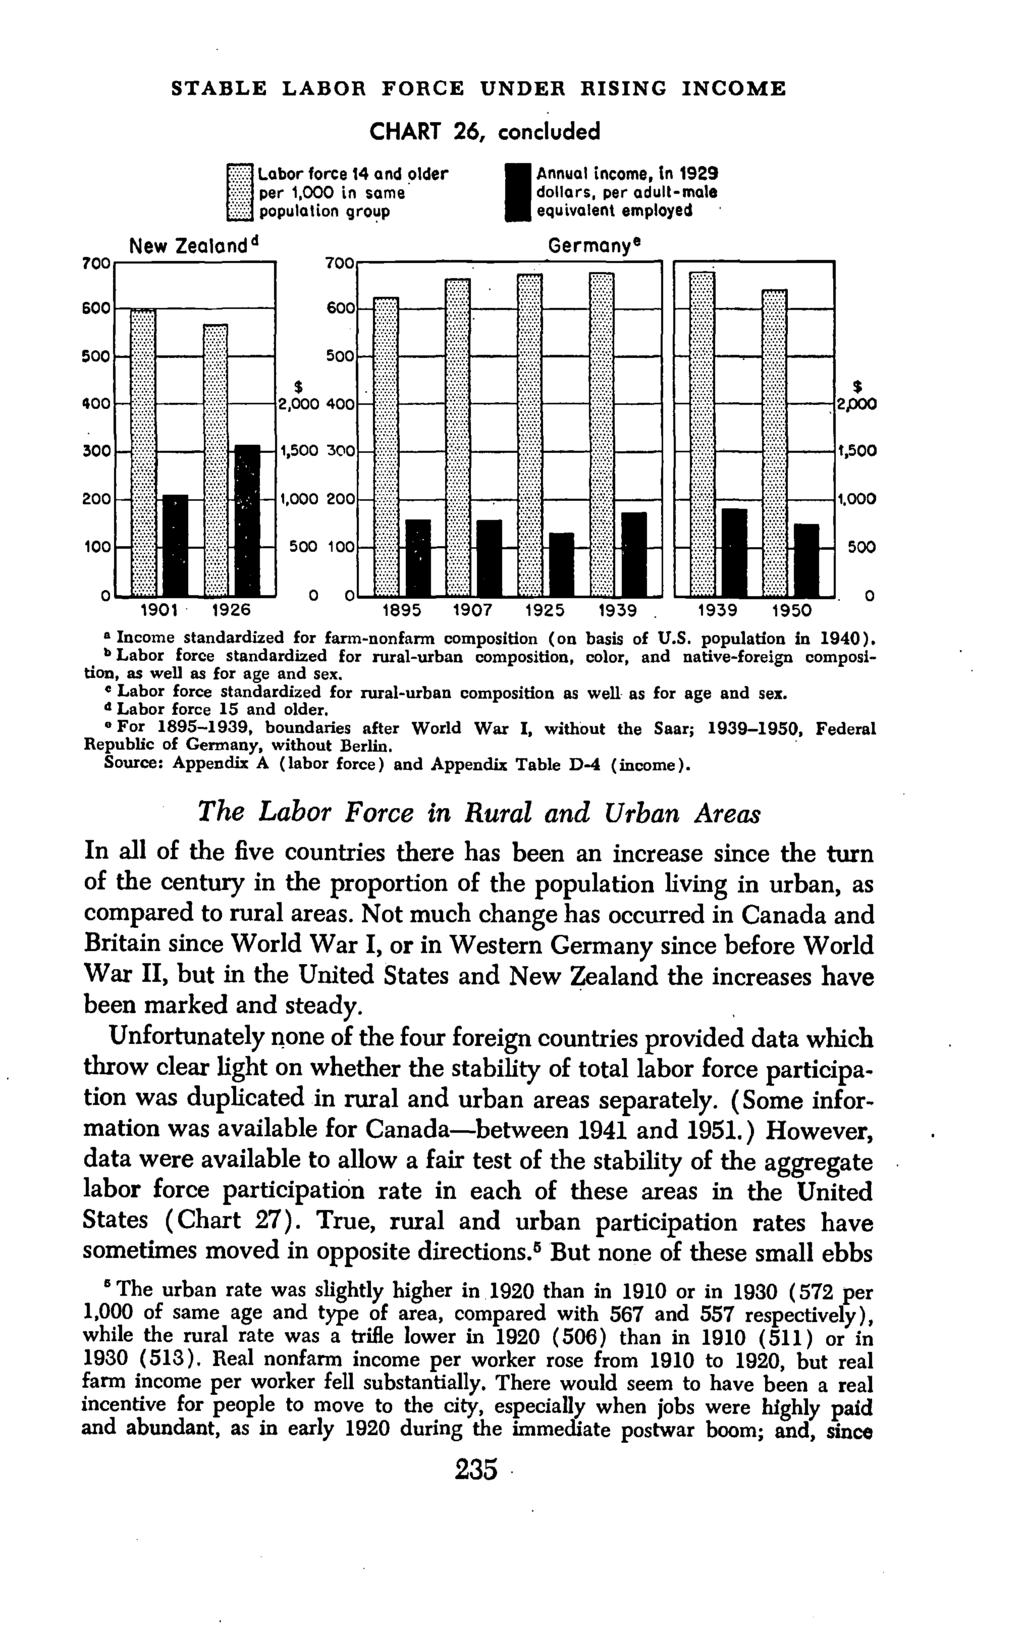 STABLE LABOR FORCE UNDER RISING INCOME CHART 26, concluded 700 600 New Zealondd Labor force 14 and otder per 1,000 in same population group J Annual income, In 1929 dollars, per adult male equivalent